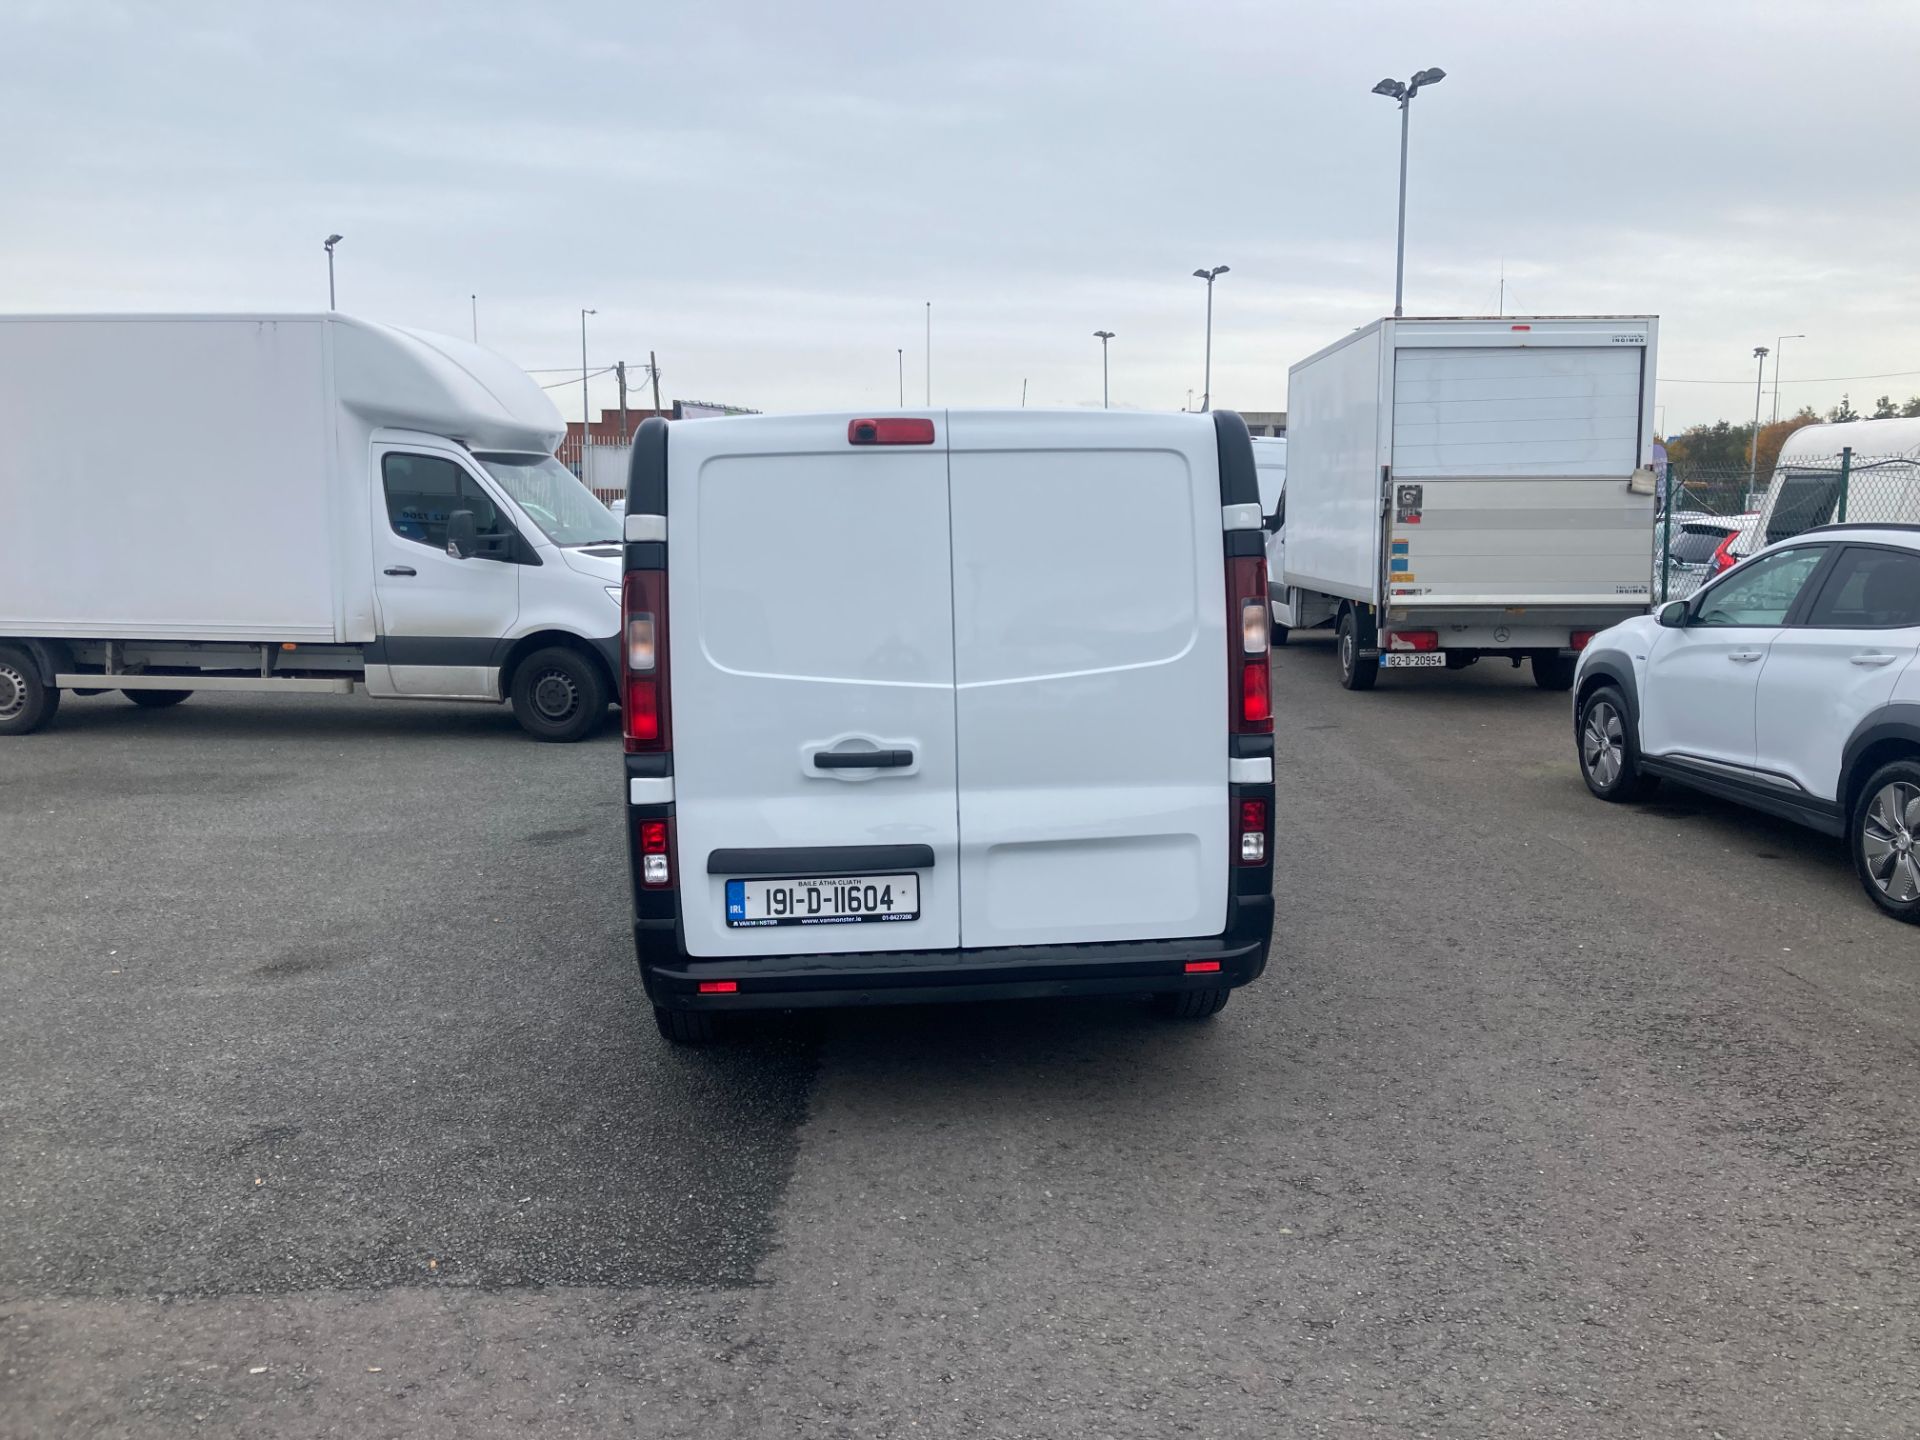 2019 Renault Trafic LL29 DCI 120 Business (191D11604) Image 6